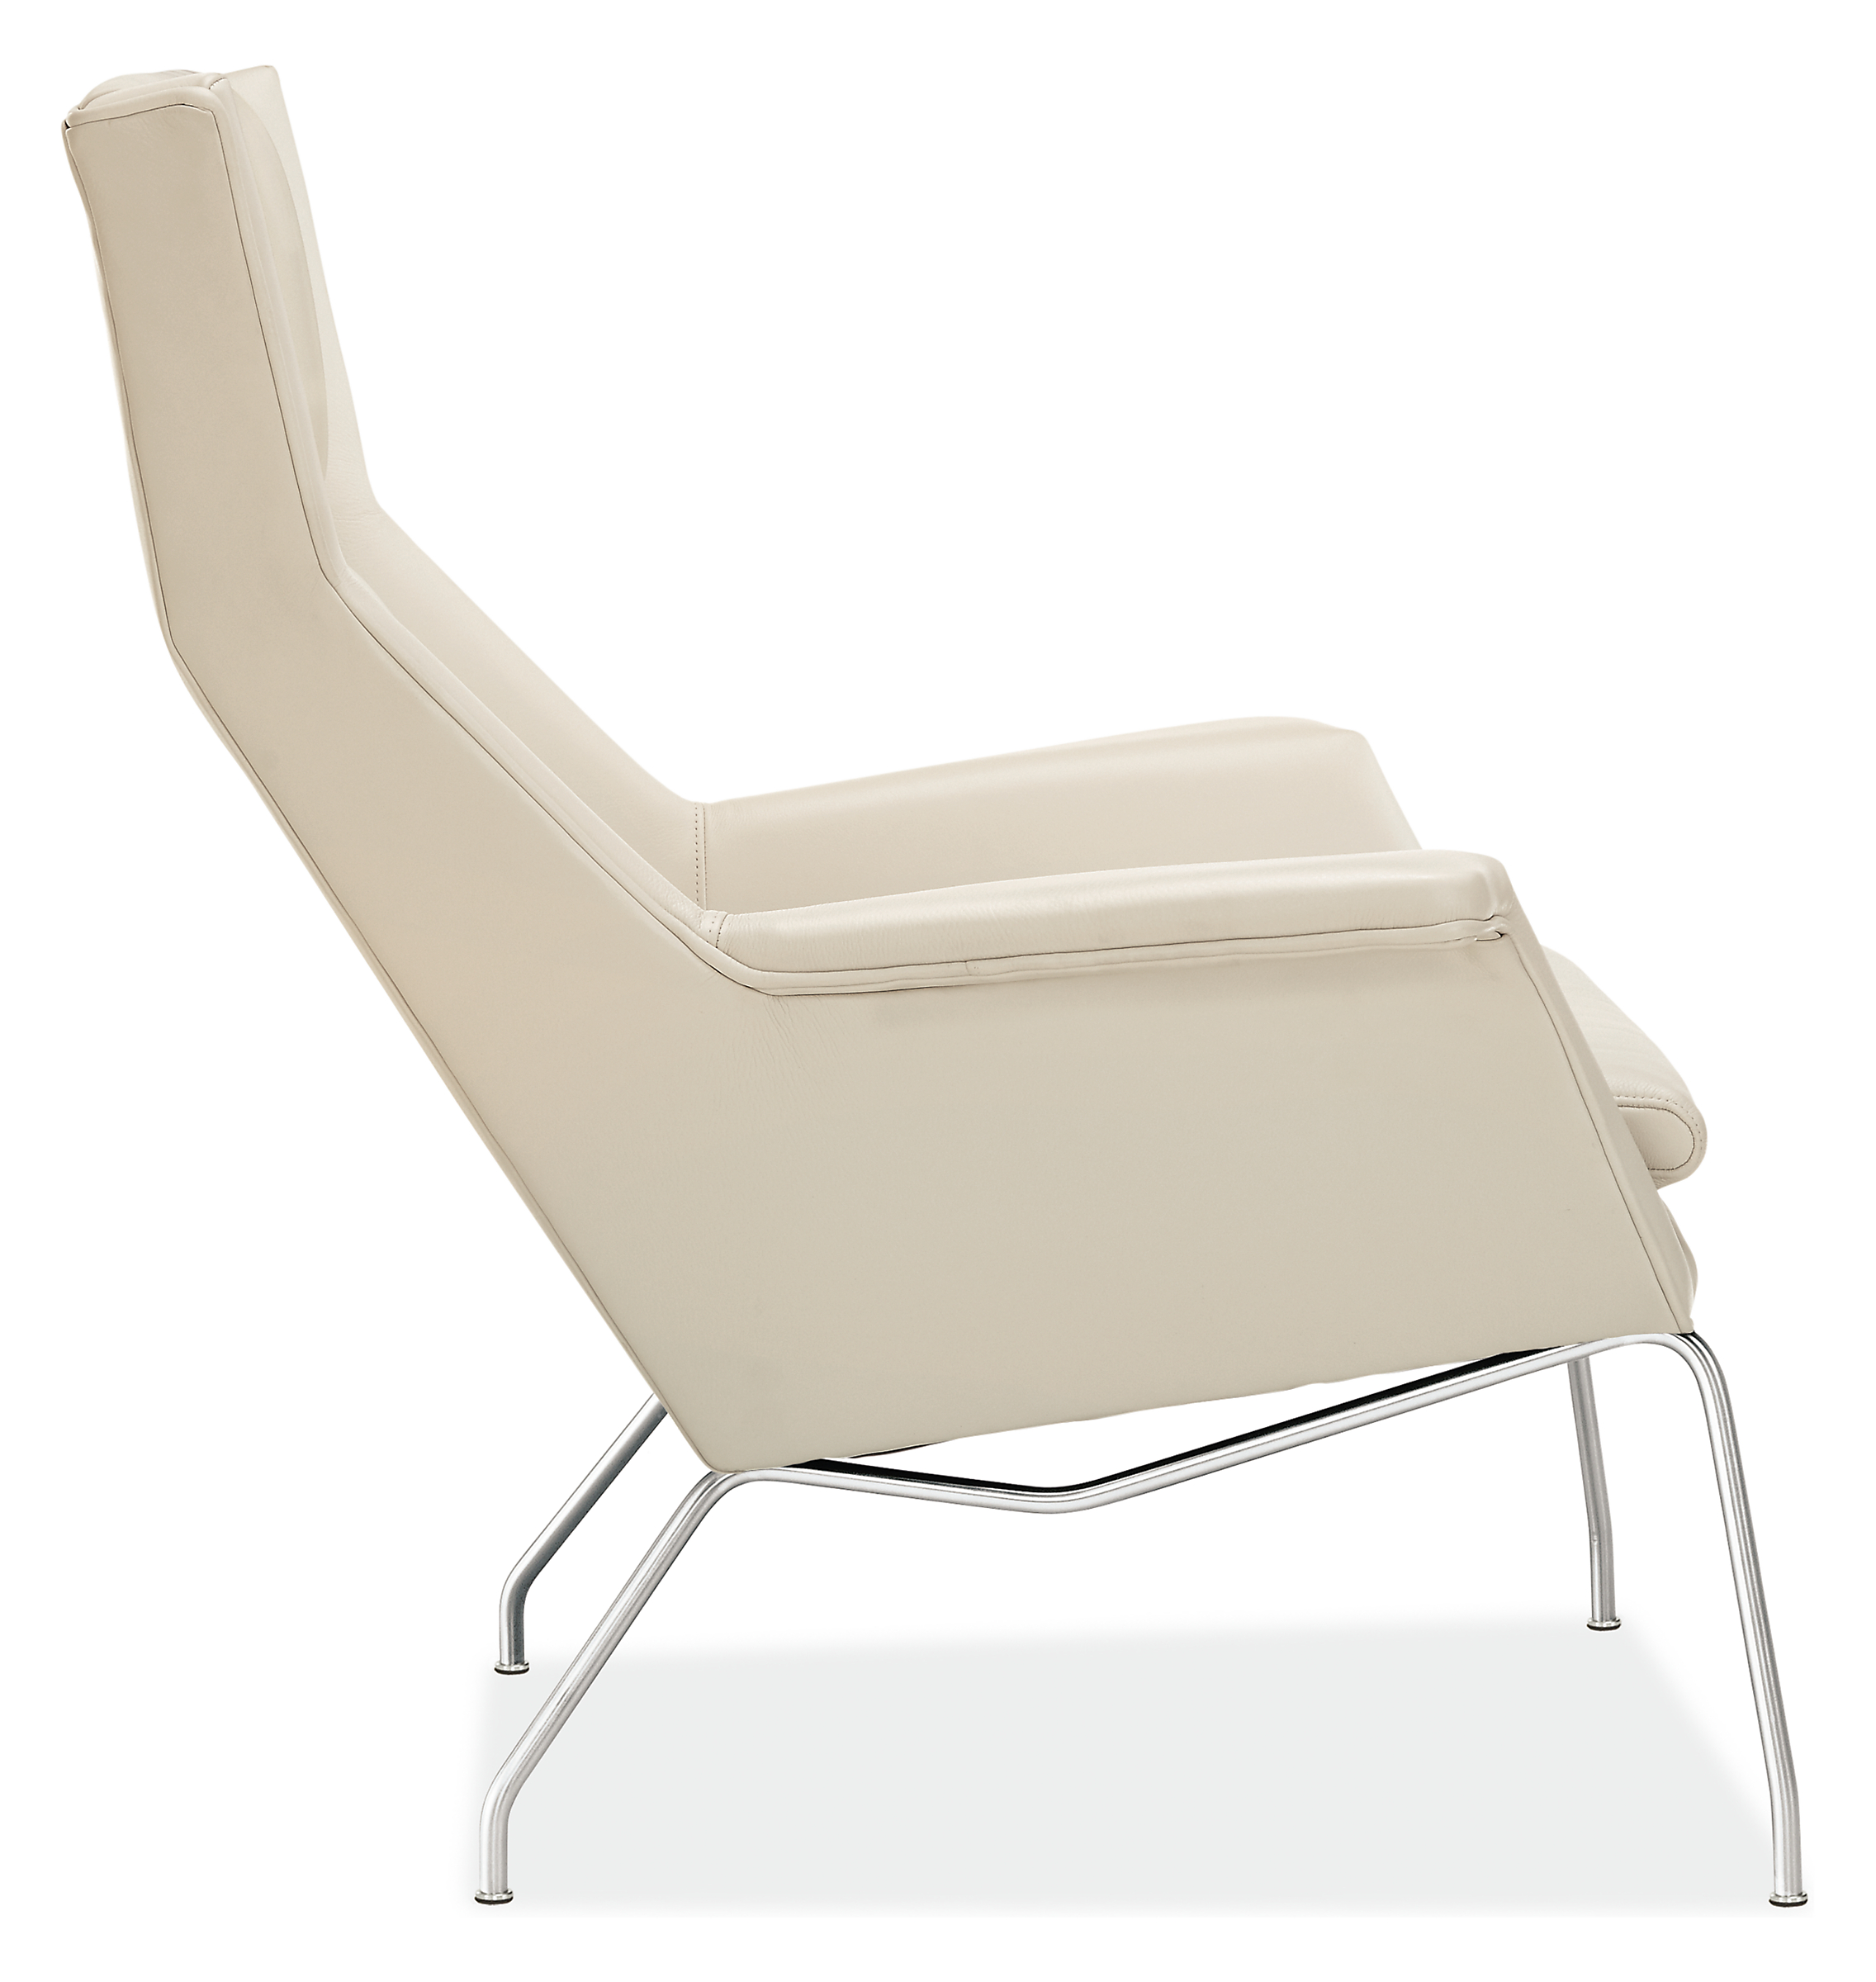 Side view of Aidan Chair in Urbino Leather with Stainless Steel base.